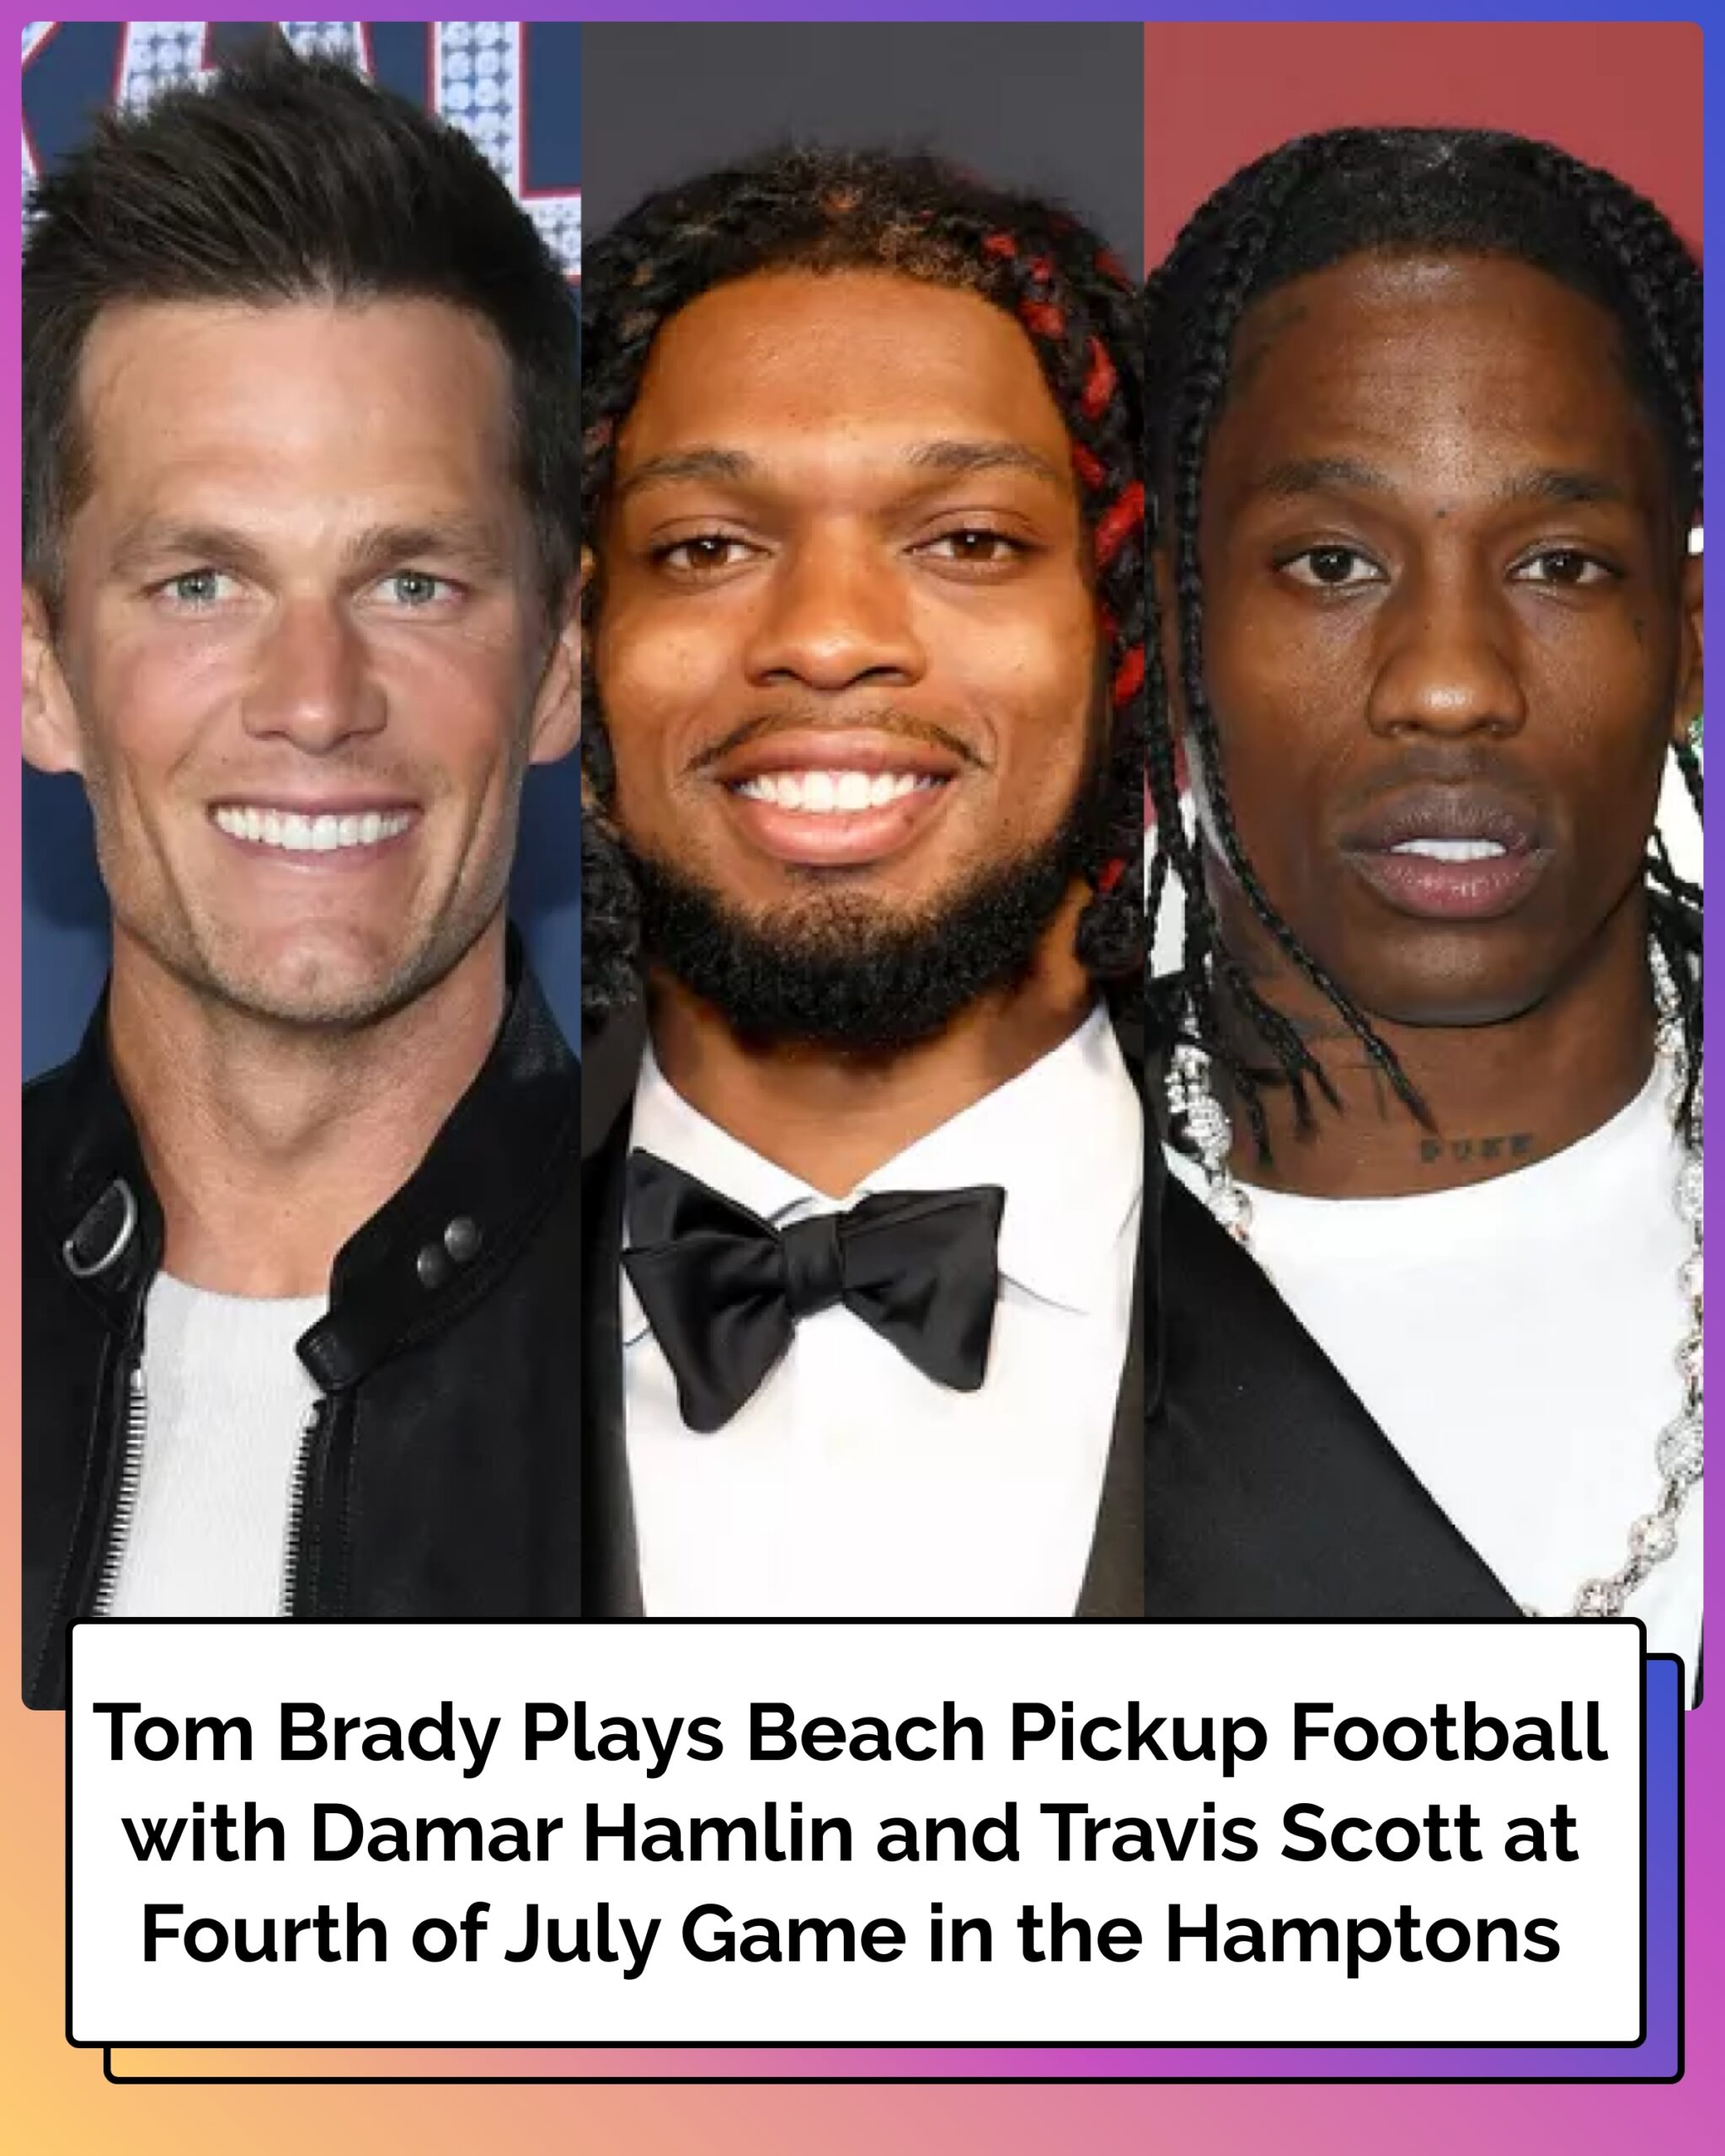 Tom Brady Plays Beach Pickup Football with Damar Hamlin and Travis Scott at Fourth of July Game in the Hamptons